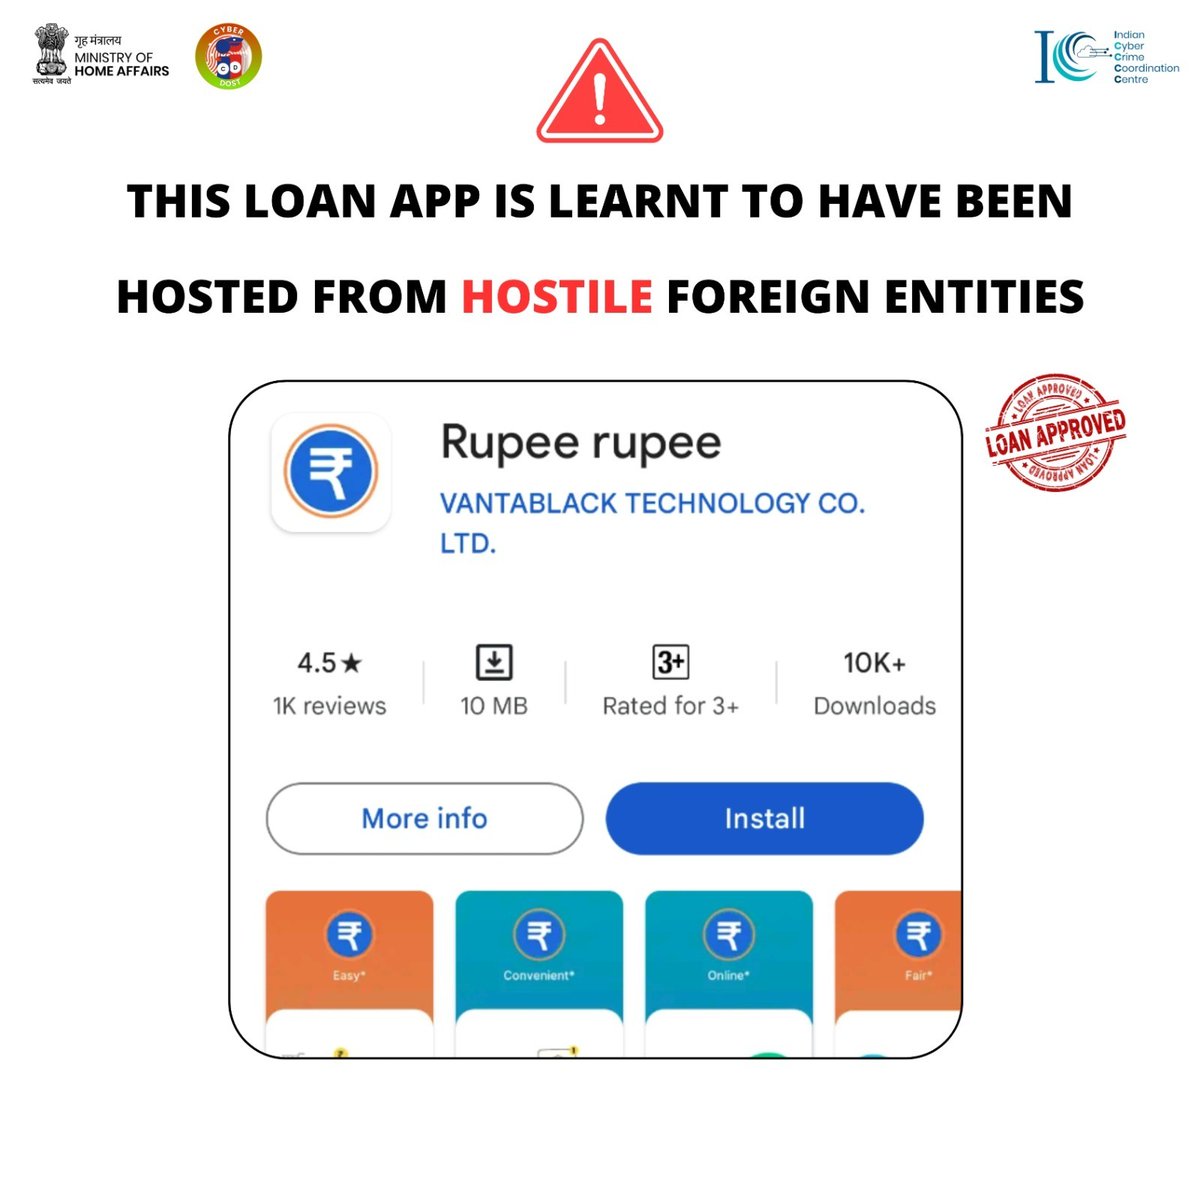 Beware! The Rupee rupee - Loan app is learnt to be associated with hostile foreign entities. #LoanApps #Cybercrime #DigitalSafety #Lending #I4C #MHA #Cyberdost #Cybersecurity #CyberSafeIndia @RBI @GooglePlay @FinMinIndia